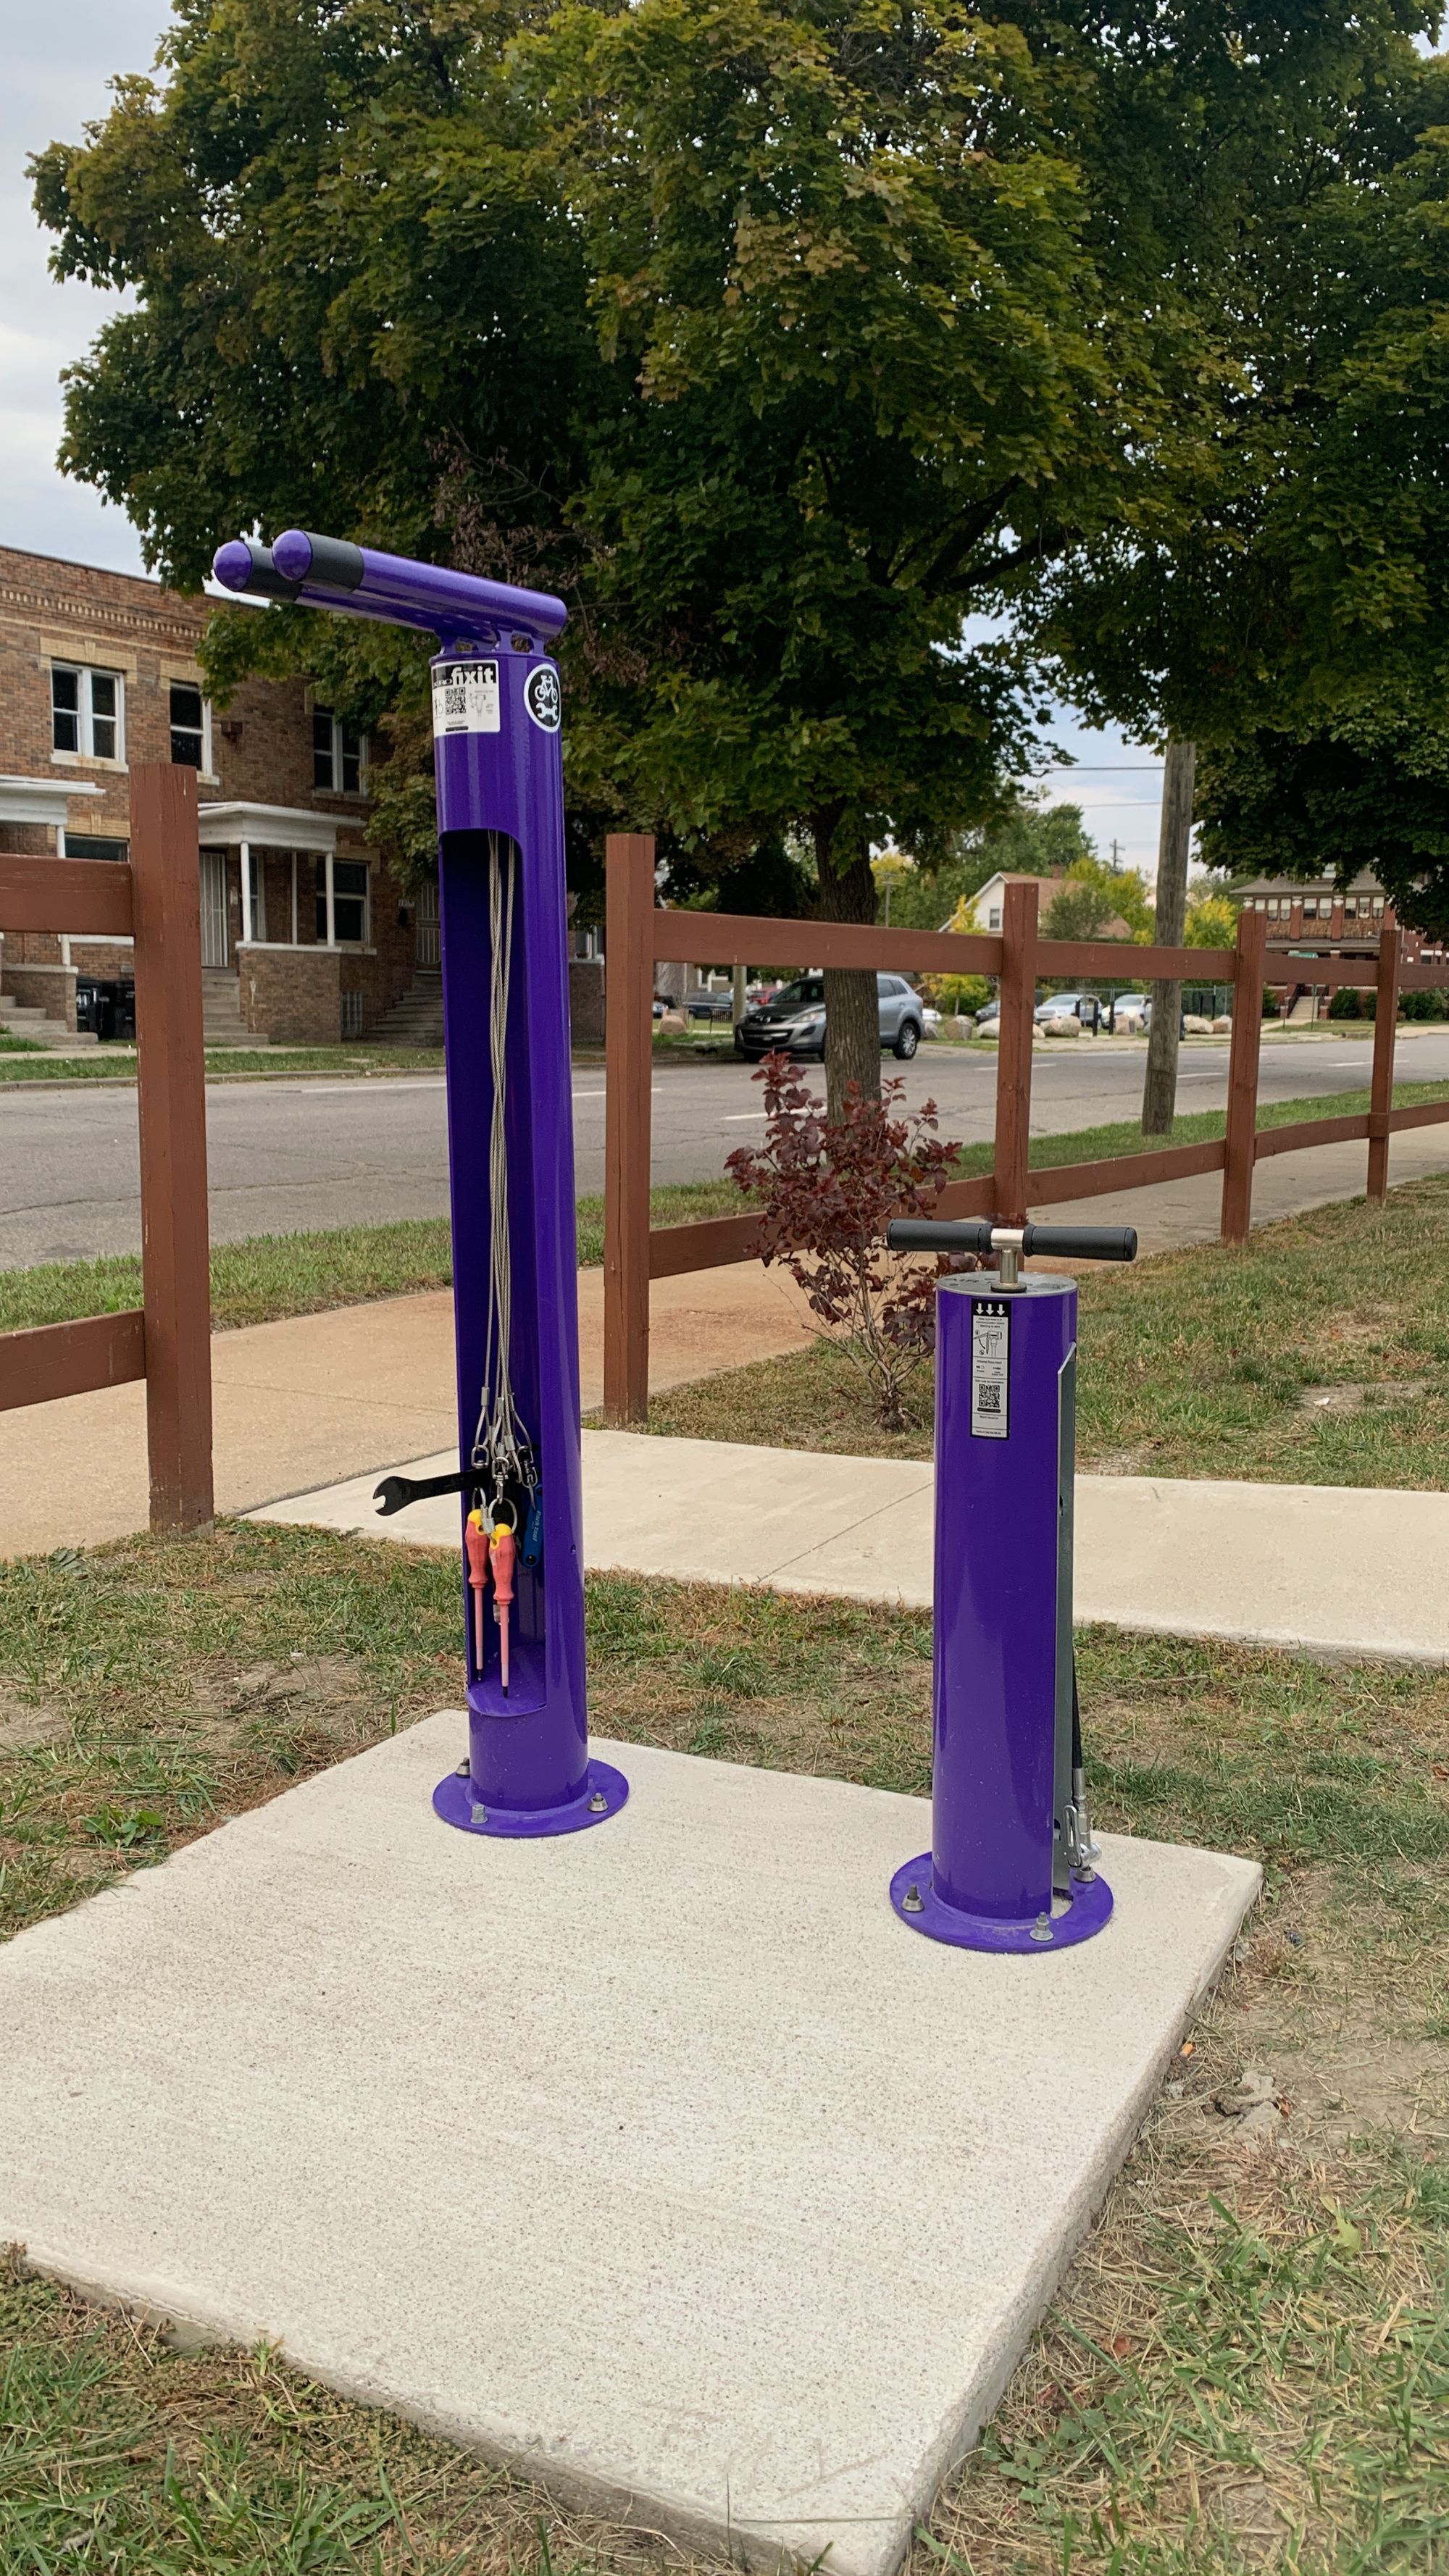 A purple public bike fixit station and pump in a neighborhood.